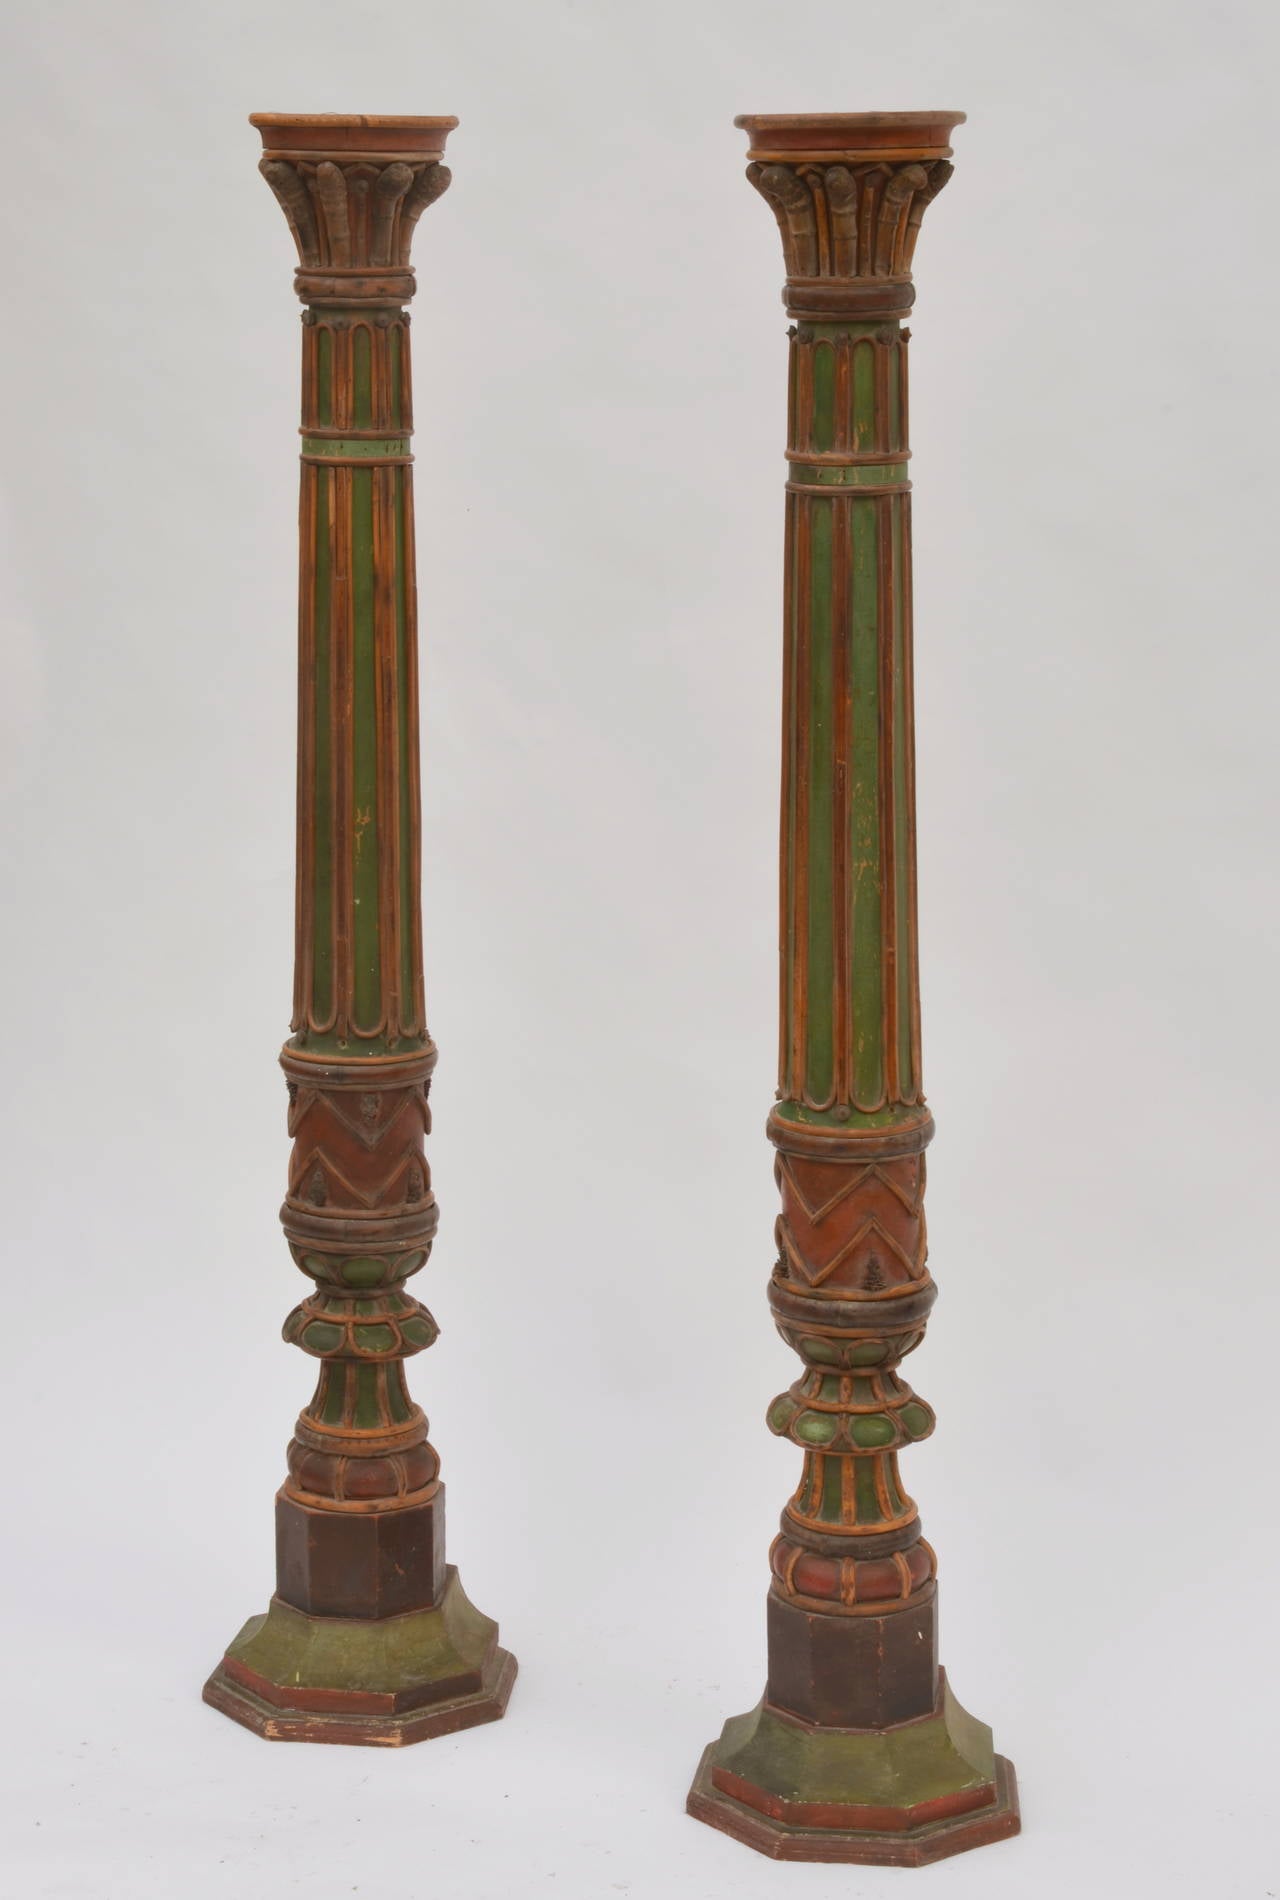 Pair of impressive French 19th century Napoleon III Torchère columns. Can be used as floor lamps or against the wall as torcheres. Or just as decorative columns. Measures: 12 in. diameter at bottom and 7.5 in. diameter at top.